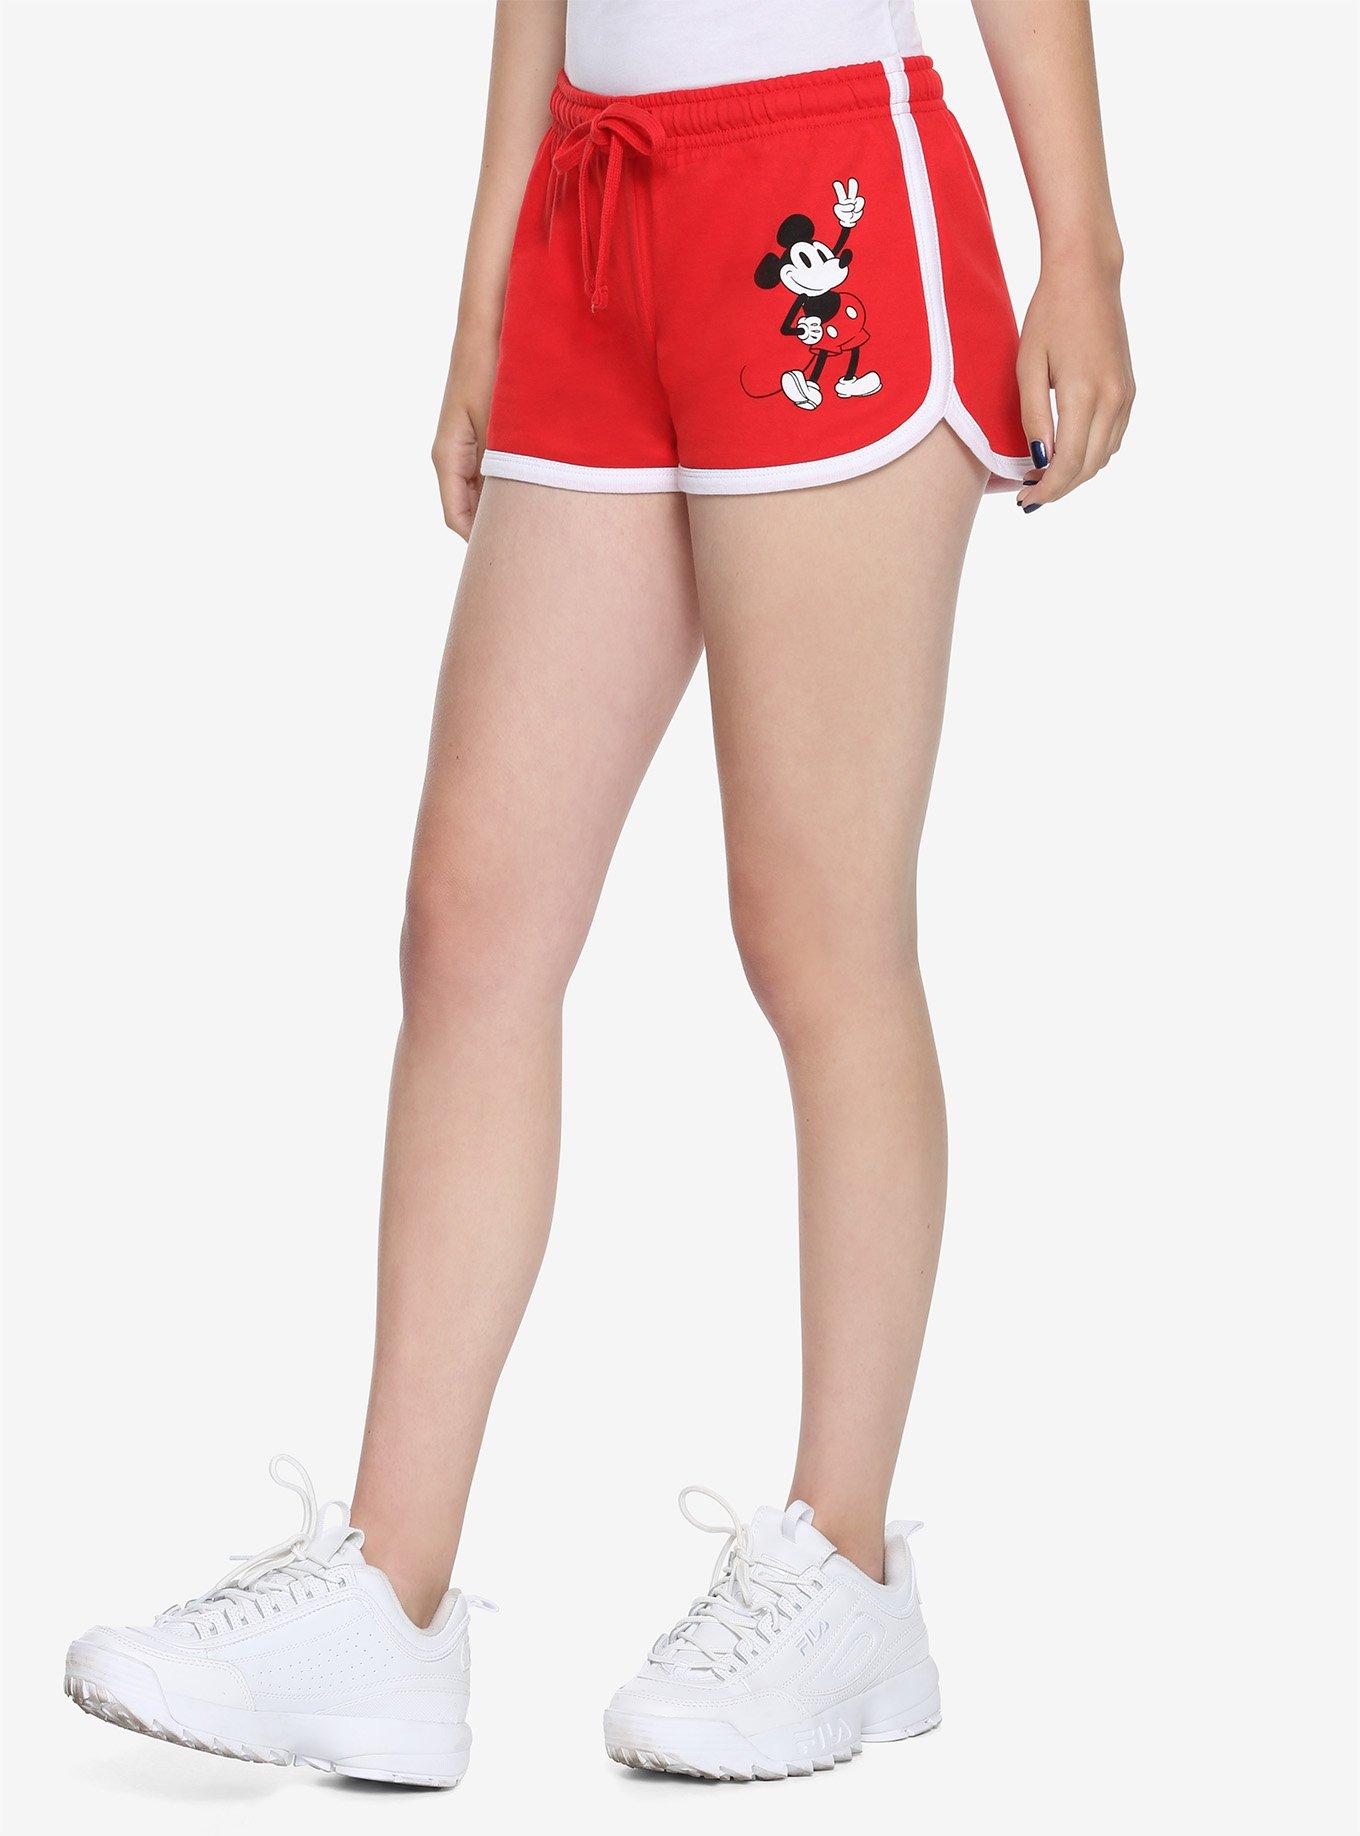 Disney Mickey Mouse Girls Lounge Shorts, RED, hi-res